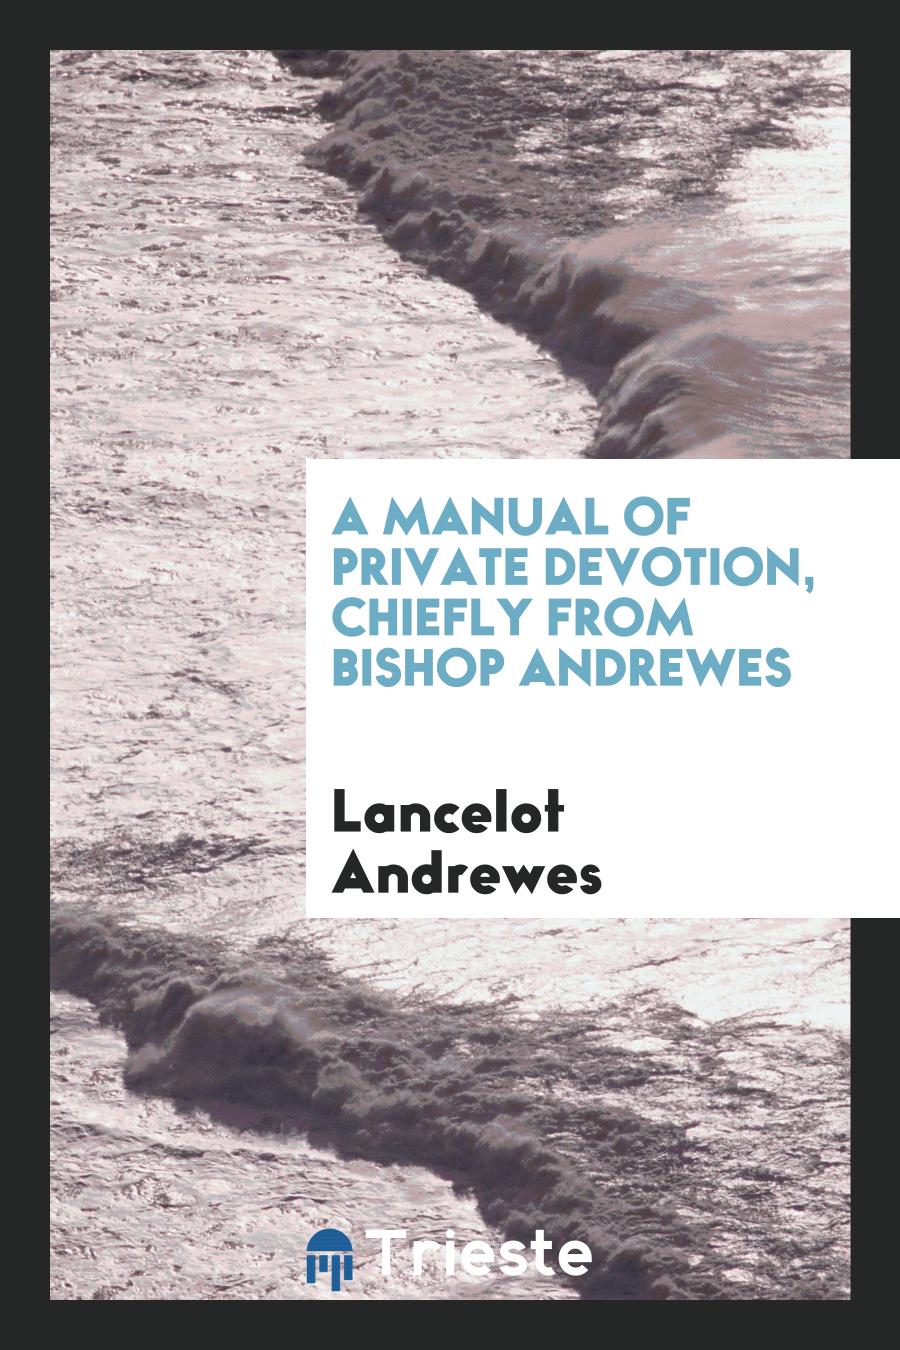 A manual of private devotion, chiefly from bishop Andrewes